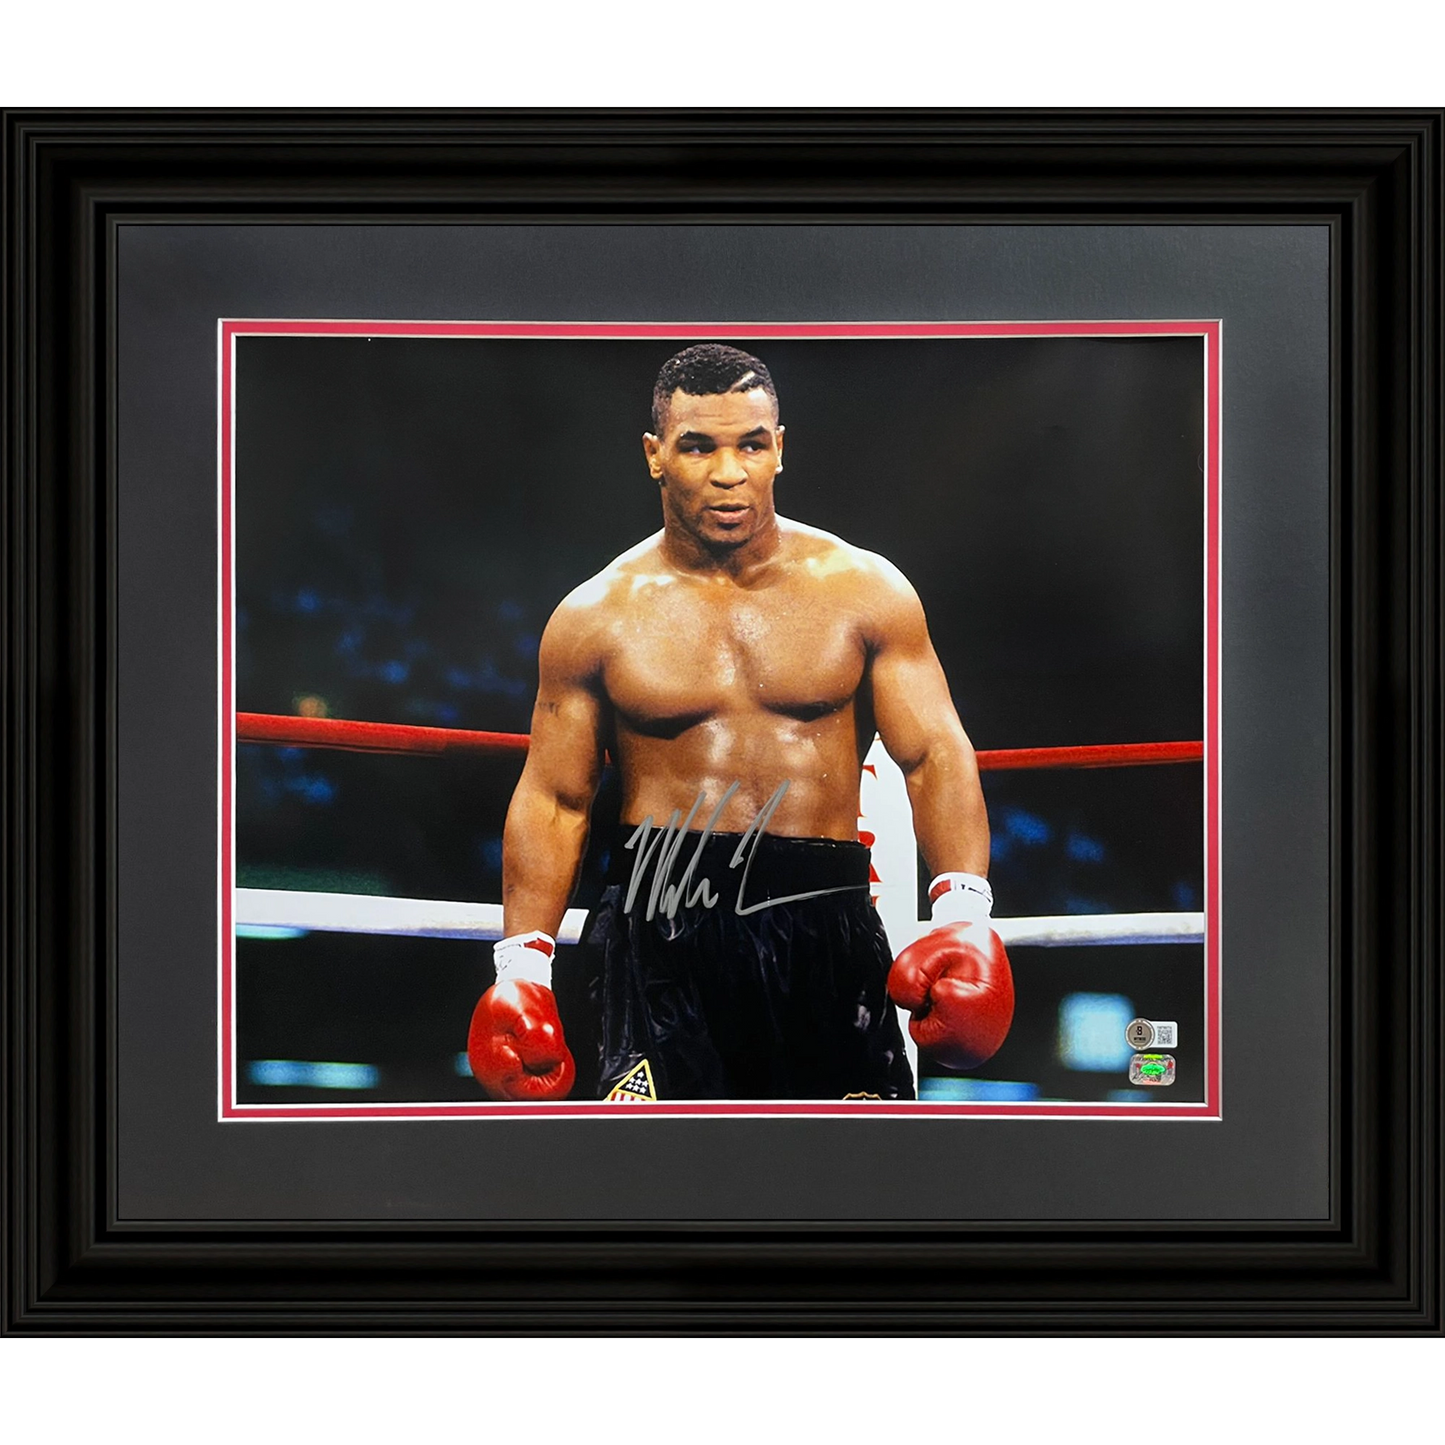 Mike Tyson Autographed Boxing (Horizontal) Deluxe Framed 16x20 Photo - JSA